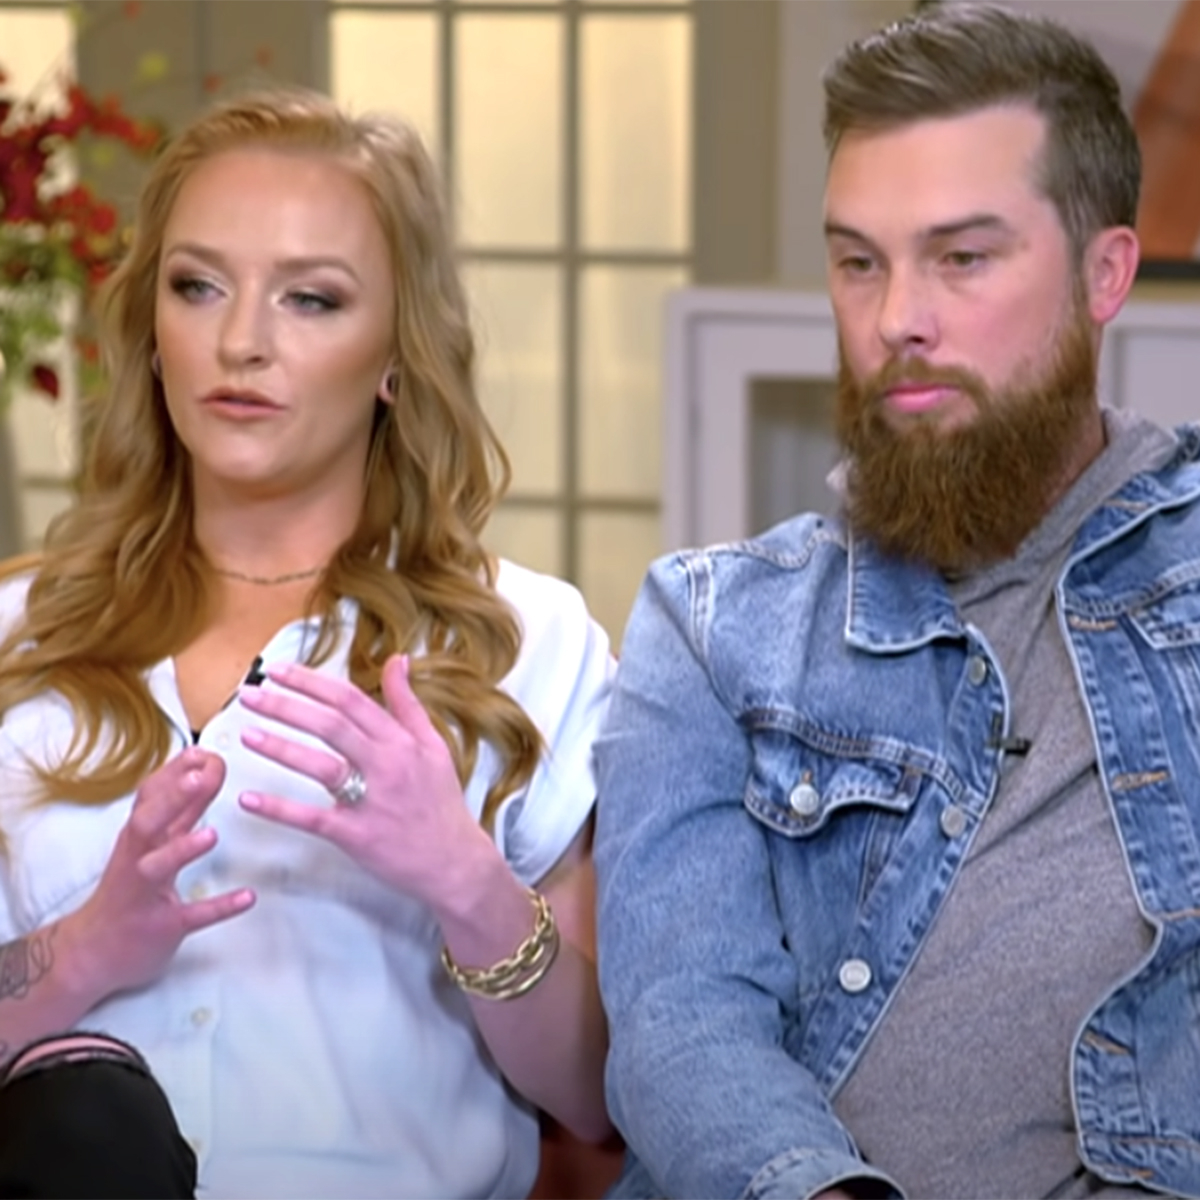 Watch Maci Bookout’s Heated Conversation With Ryan Edwards' Parents